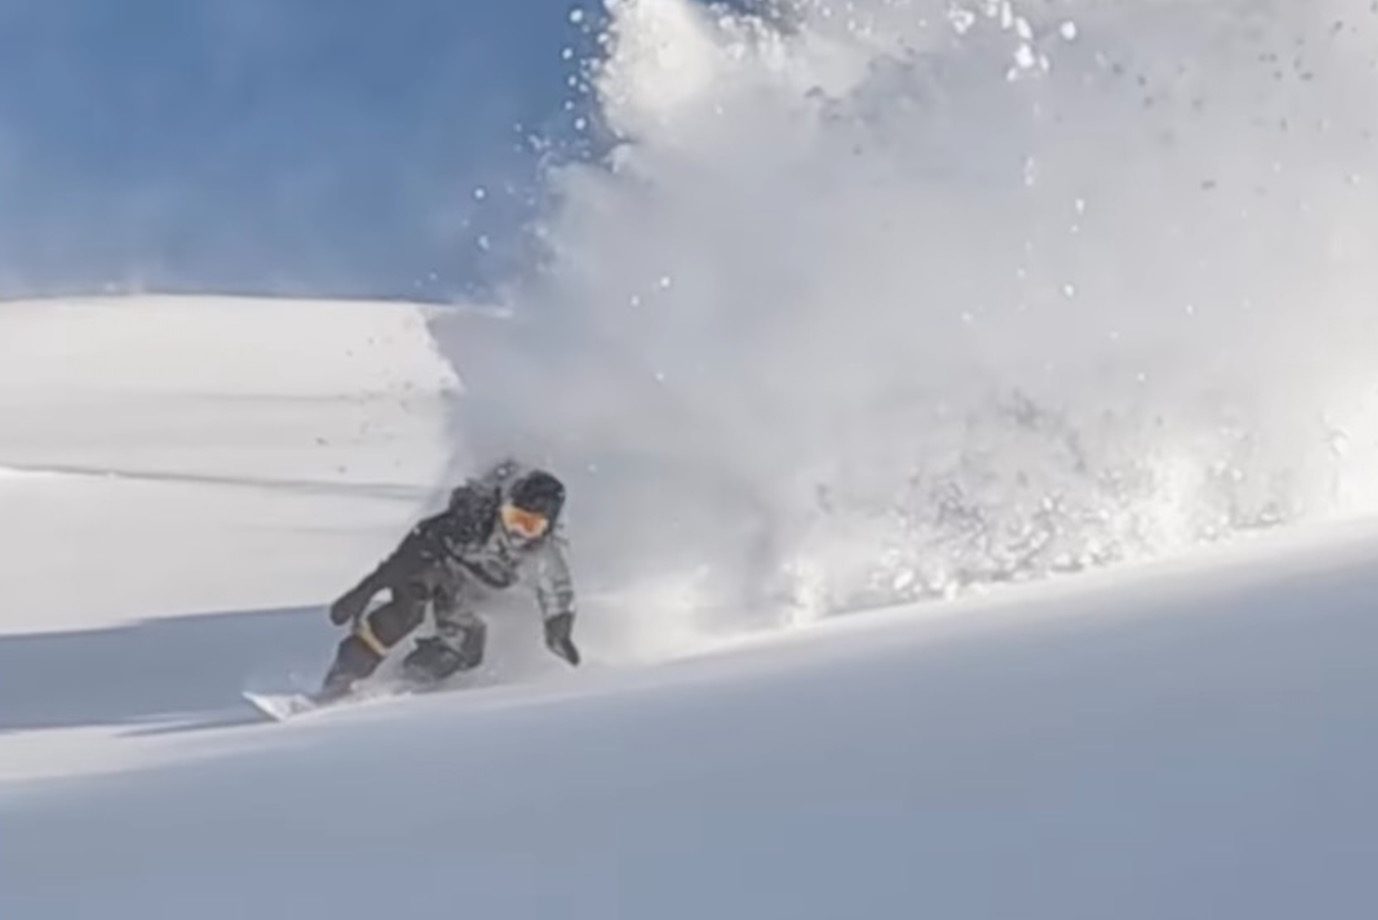 They Are Shredding POW In Argentina - Unofficial Networks